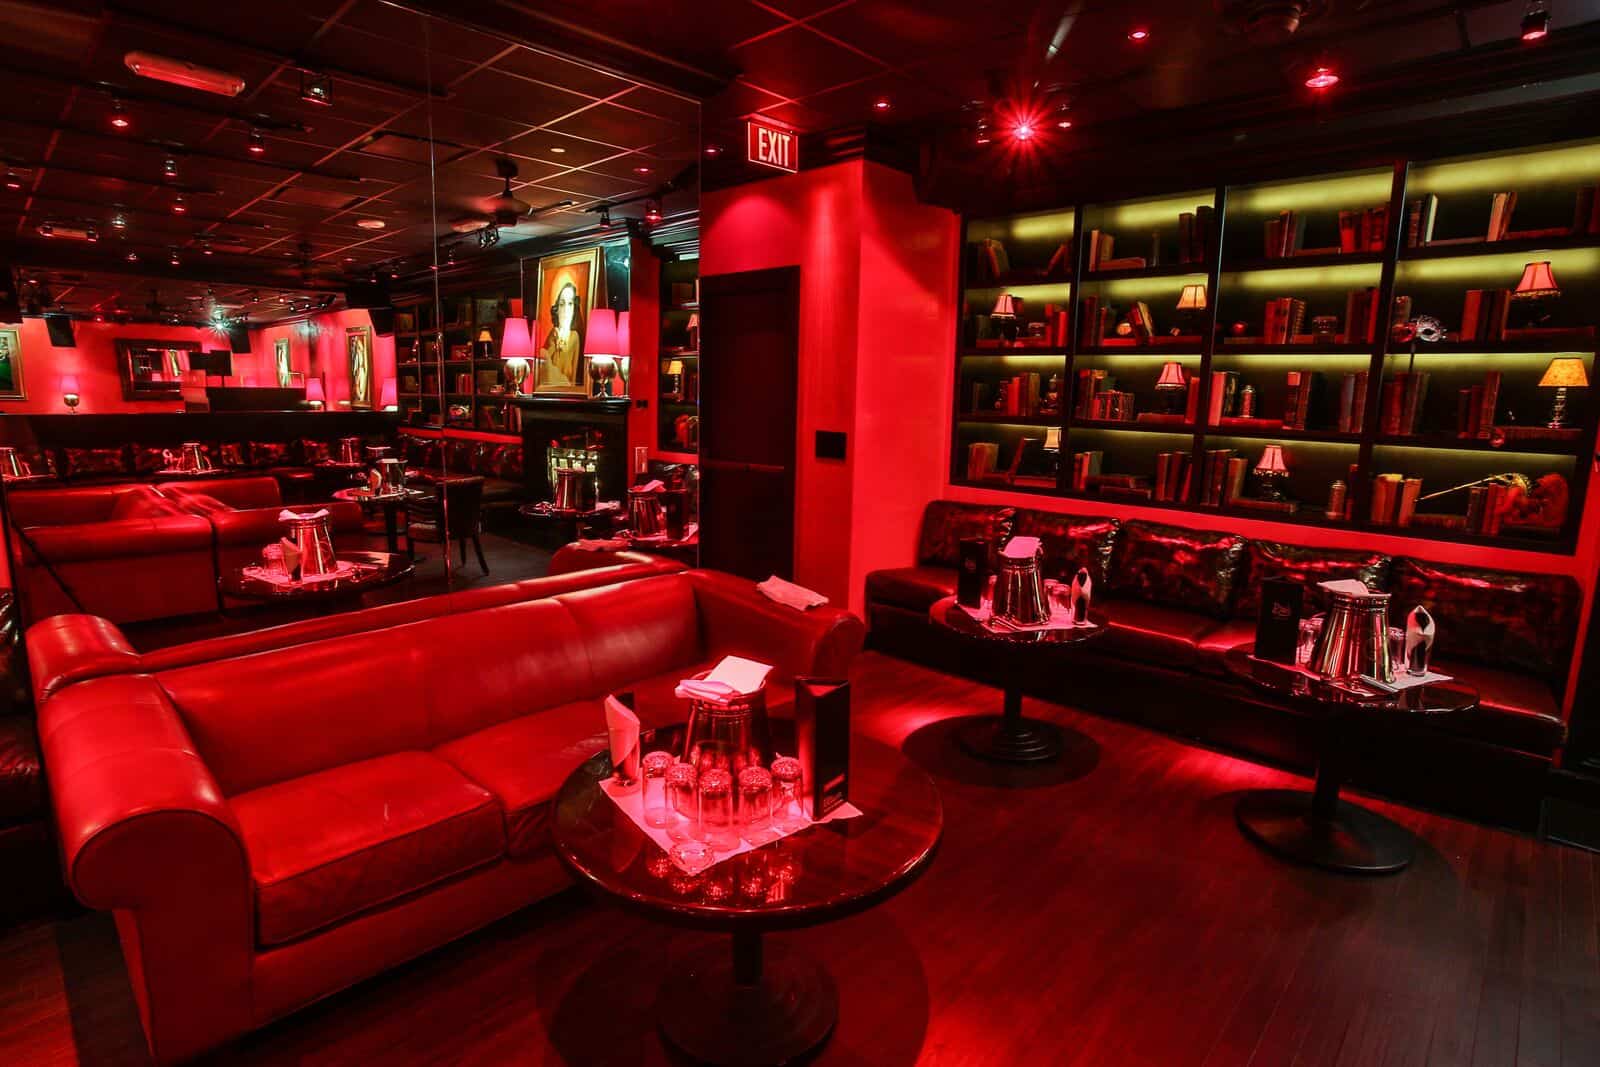 Las Vegas Drais after hours lounge and comfortable seating